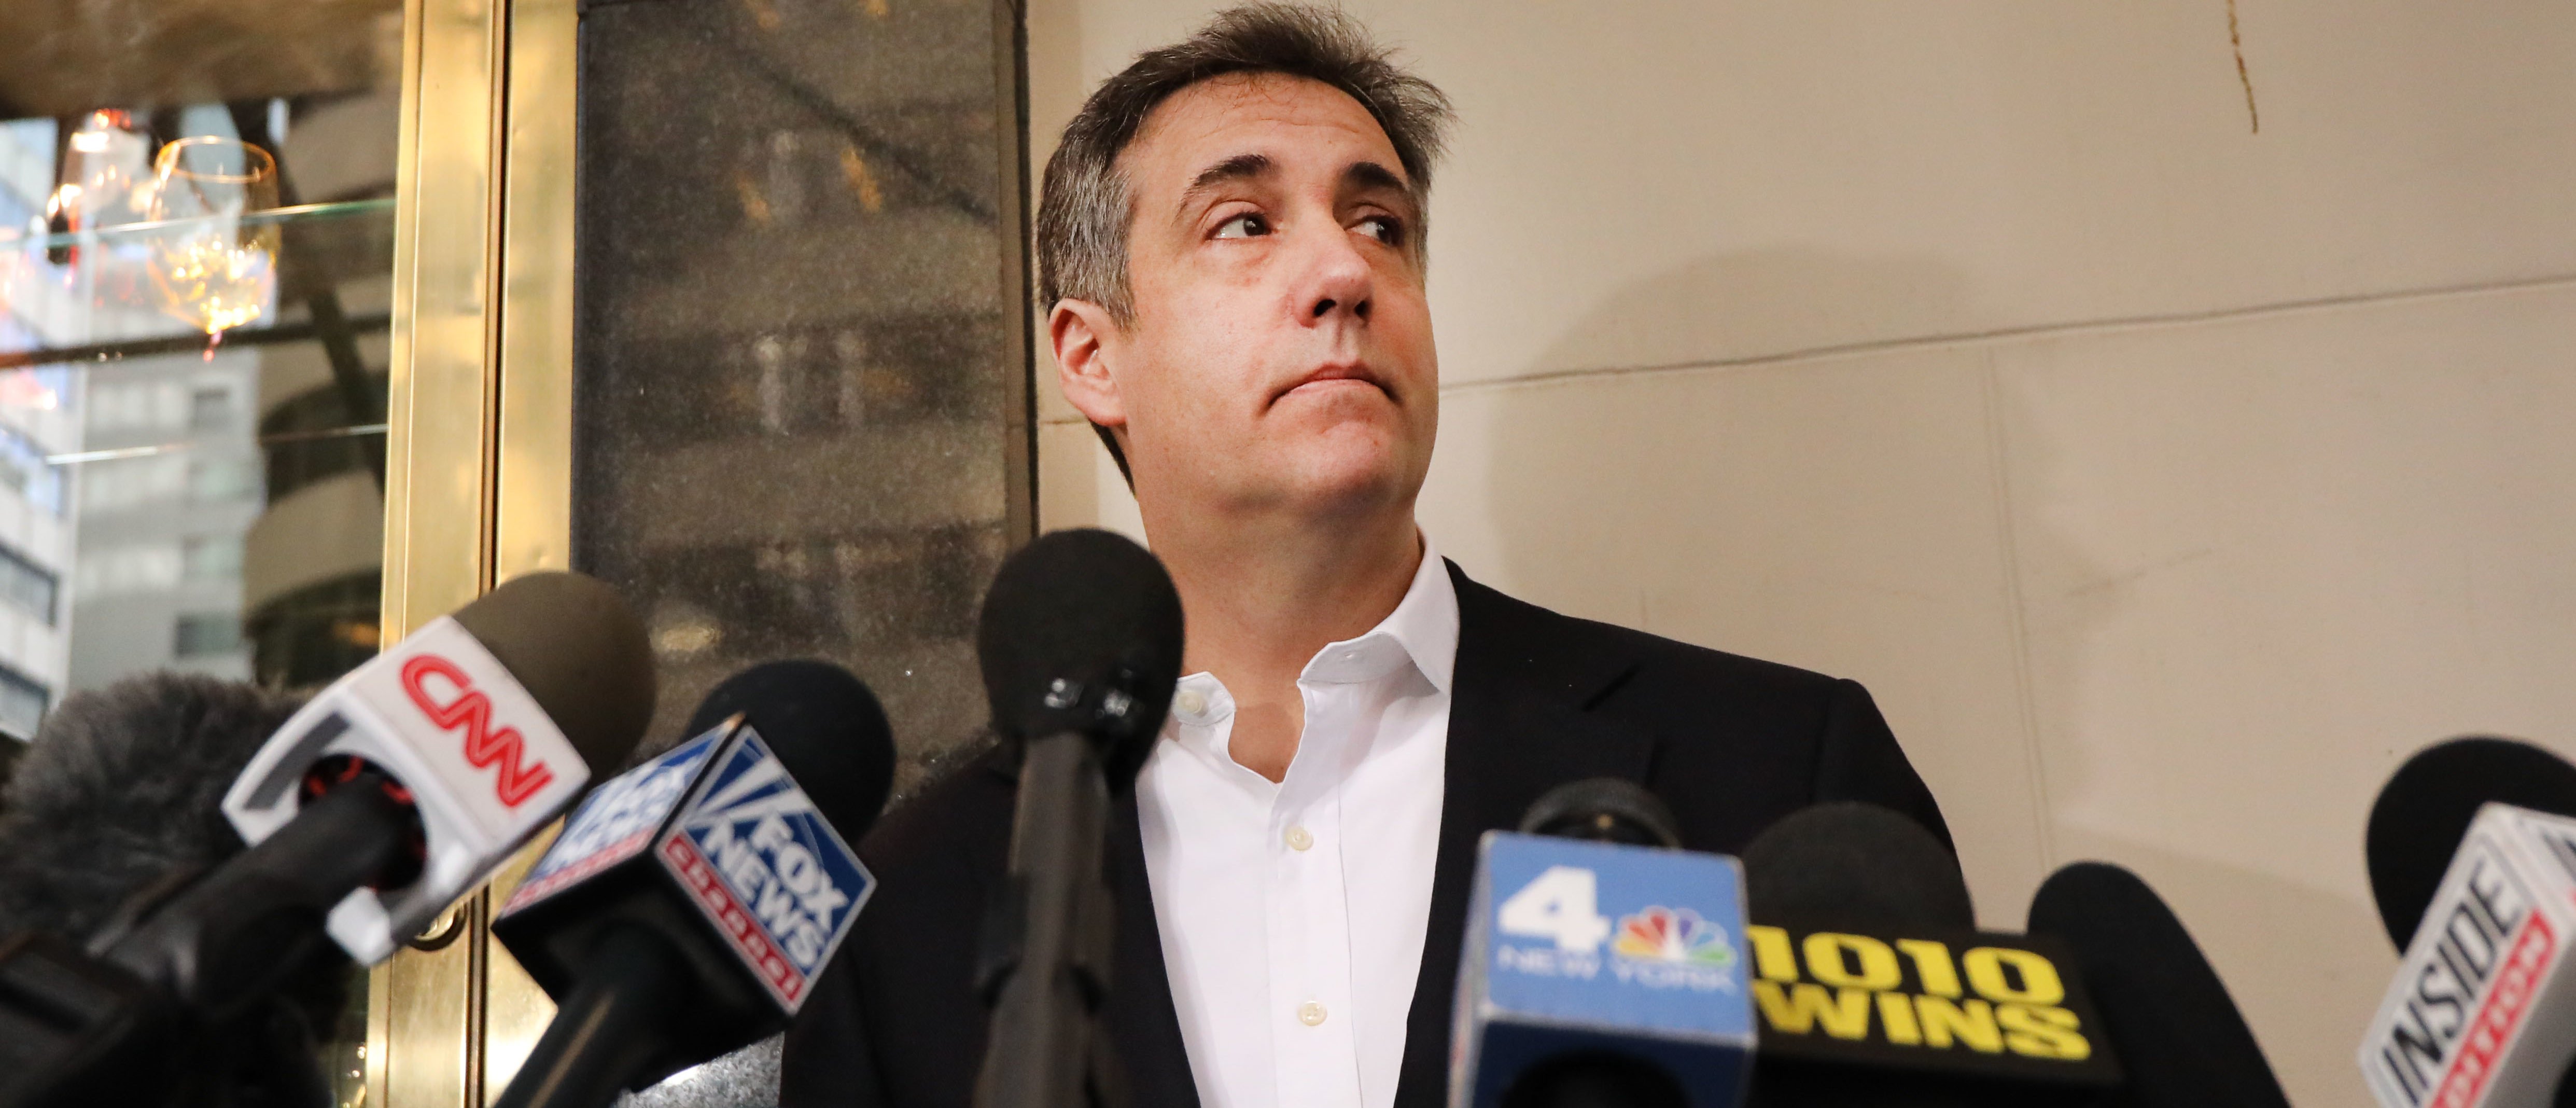 NEW YORK, NEW YORK - MAY 06: Michael Cohen, the former personal attorney to President Donald Trump, speaks to the media before departing his Manhattan apartment for prison on May 06, 2019 in New York City. Cohen is due to report to a federal prison in Otisville, New York, where he will begin serving a three-year sentence for campaign finance violations, tax evasion and other crimes. (Photo by Spencer Platt/Getty Images)